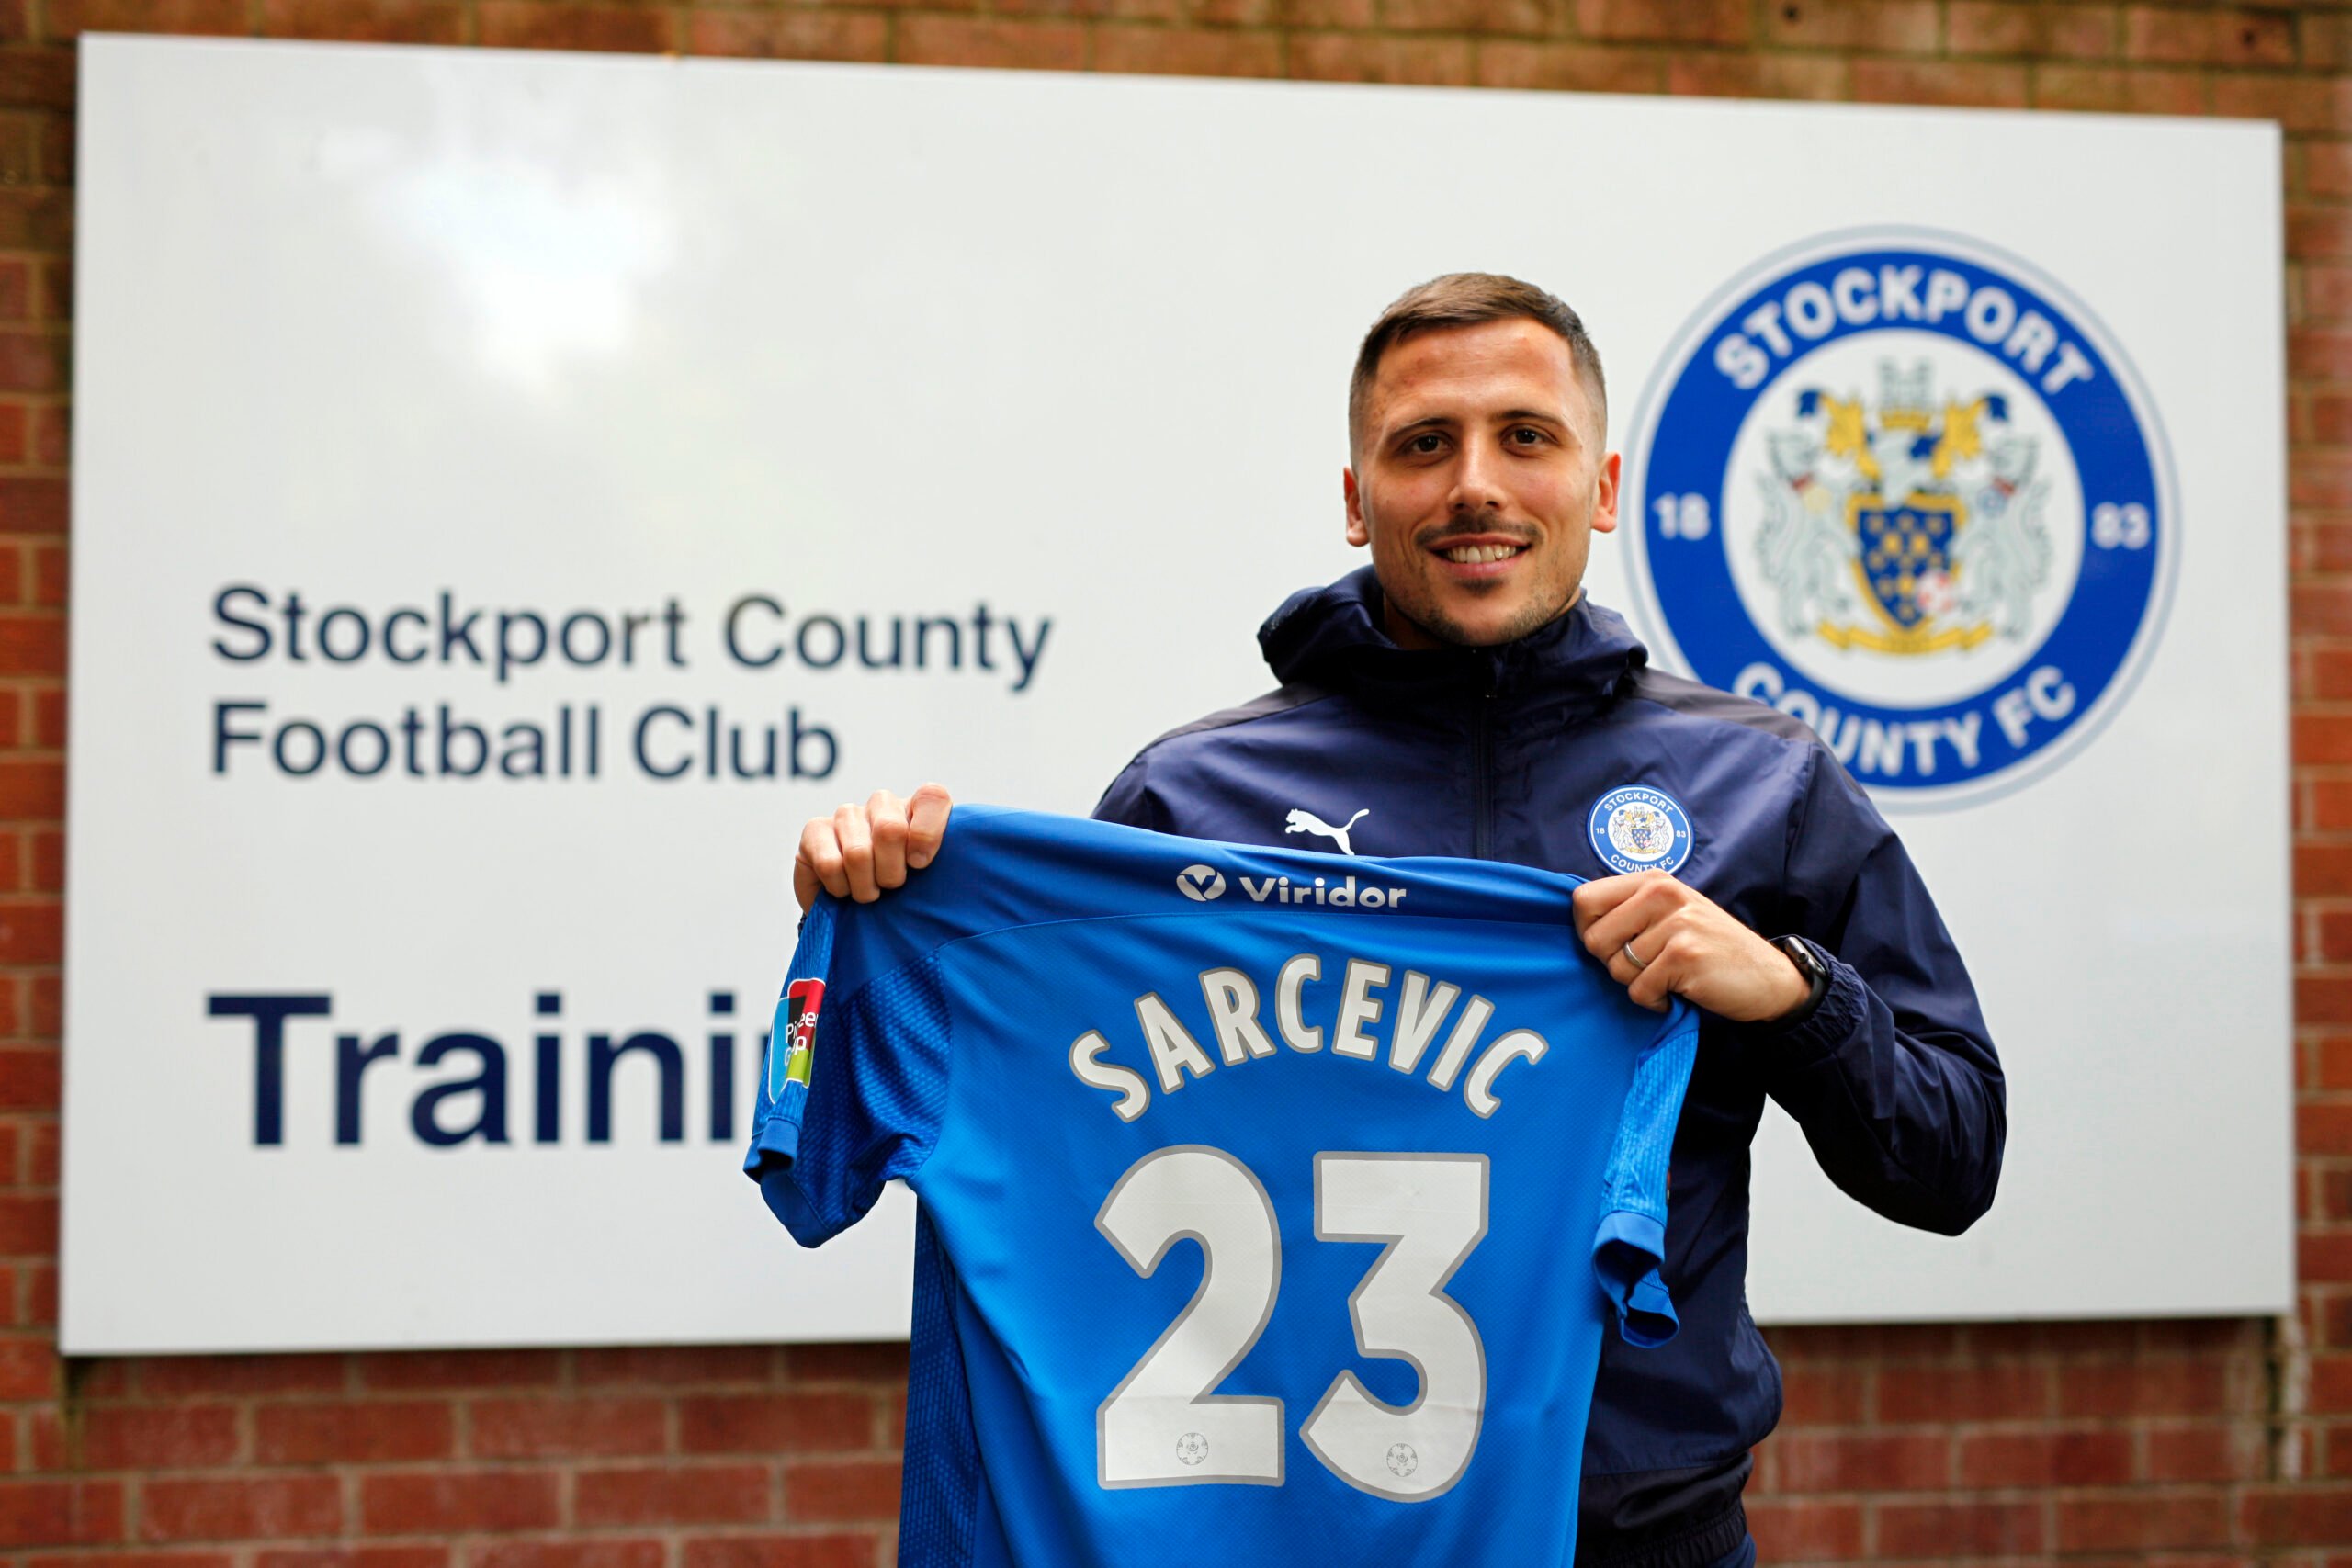 Sarcevic Coup for Stockport